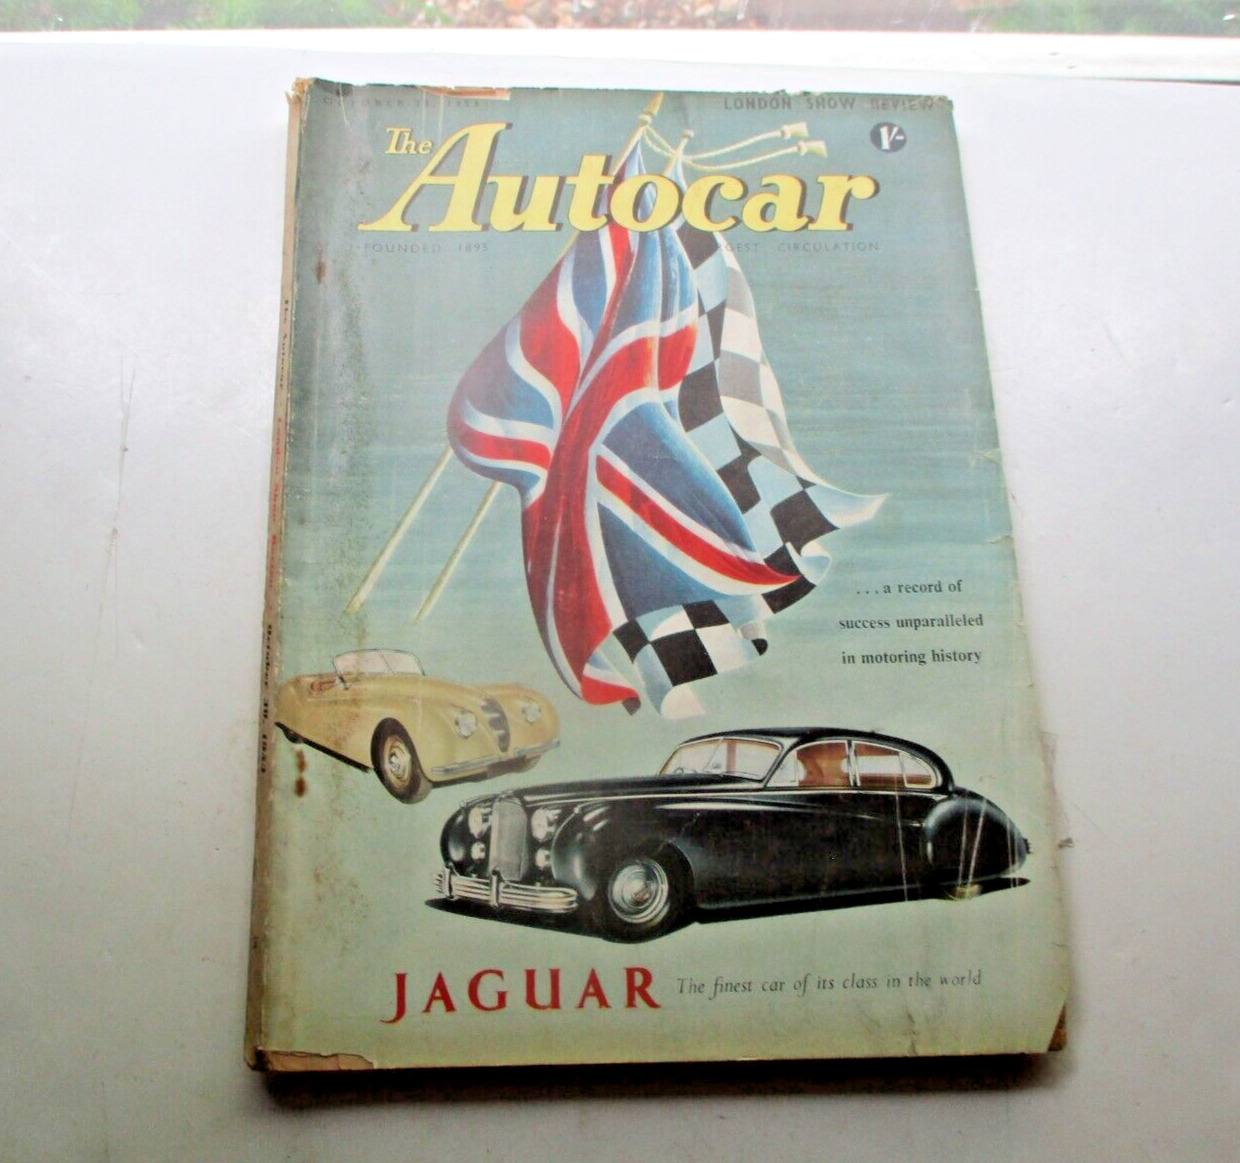 The Autocar Magazine LONDON SHOW REVIEW OCTOBER 30, 1953